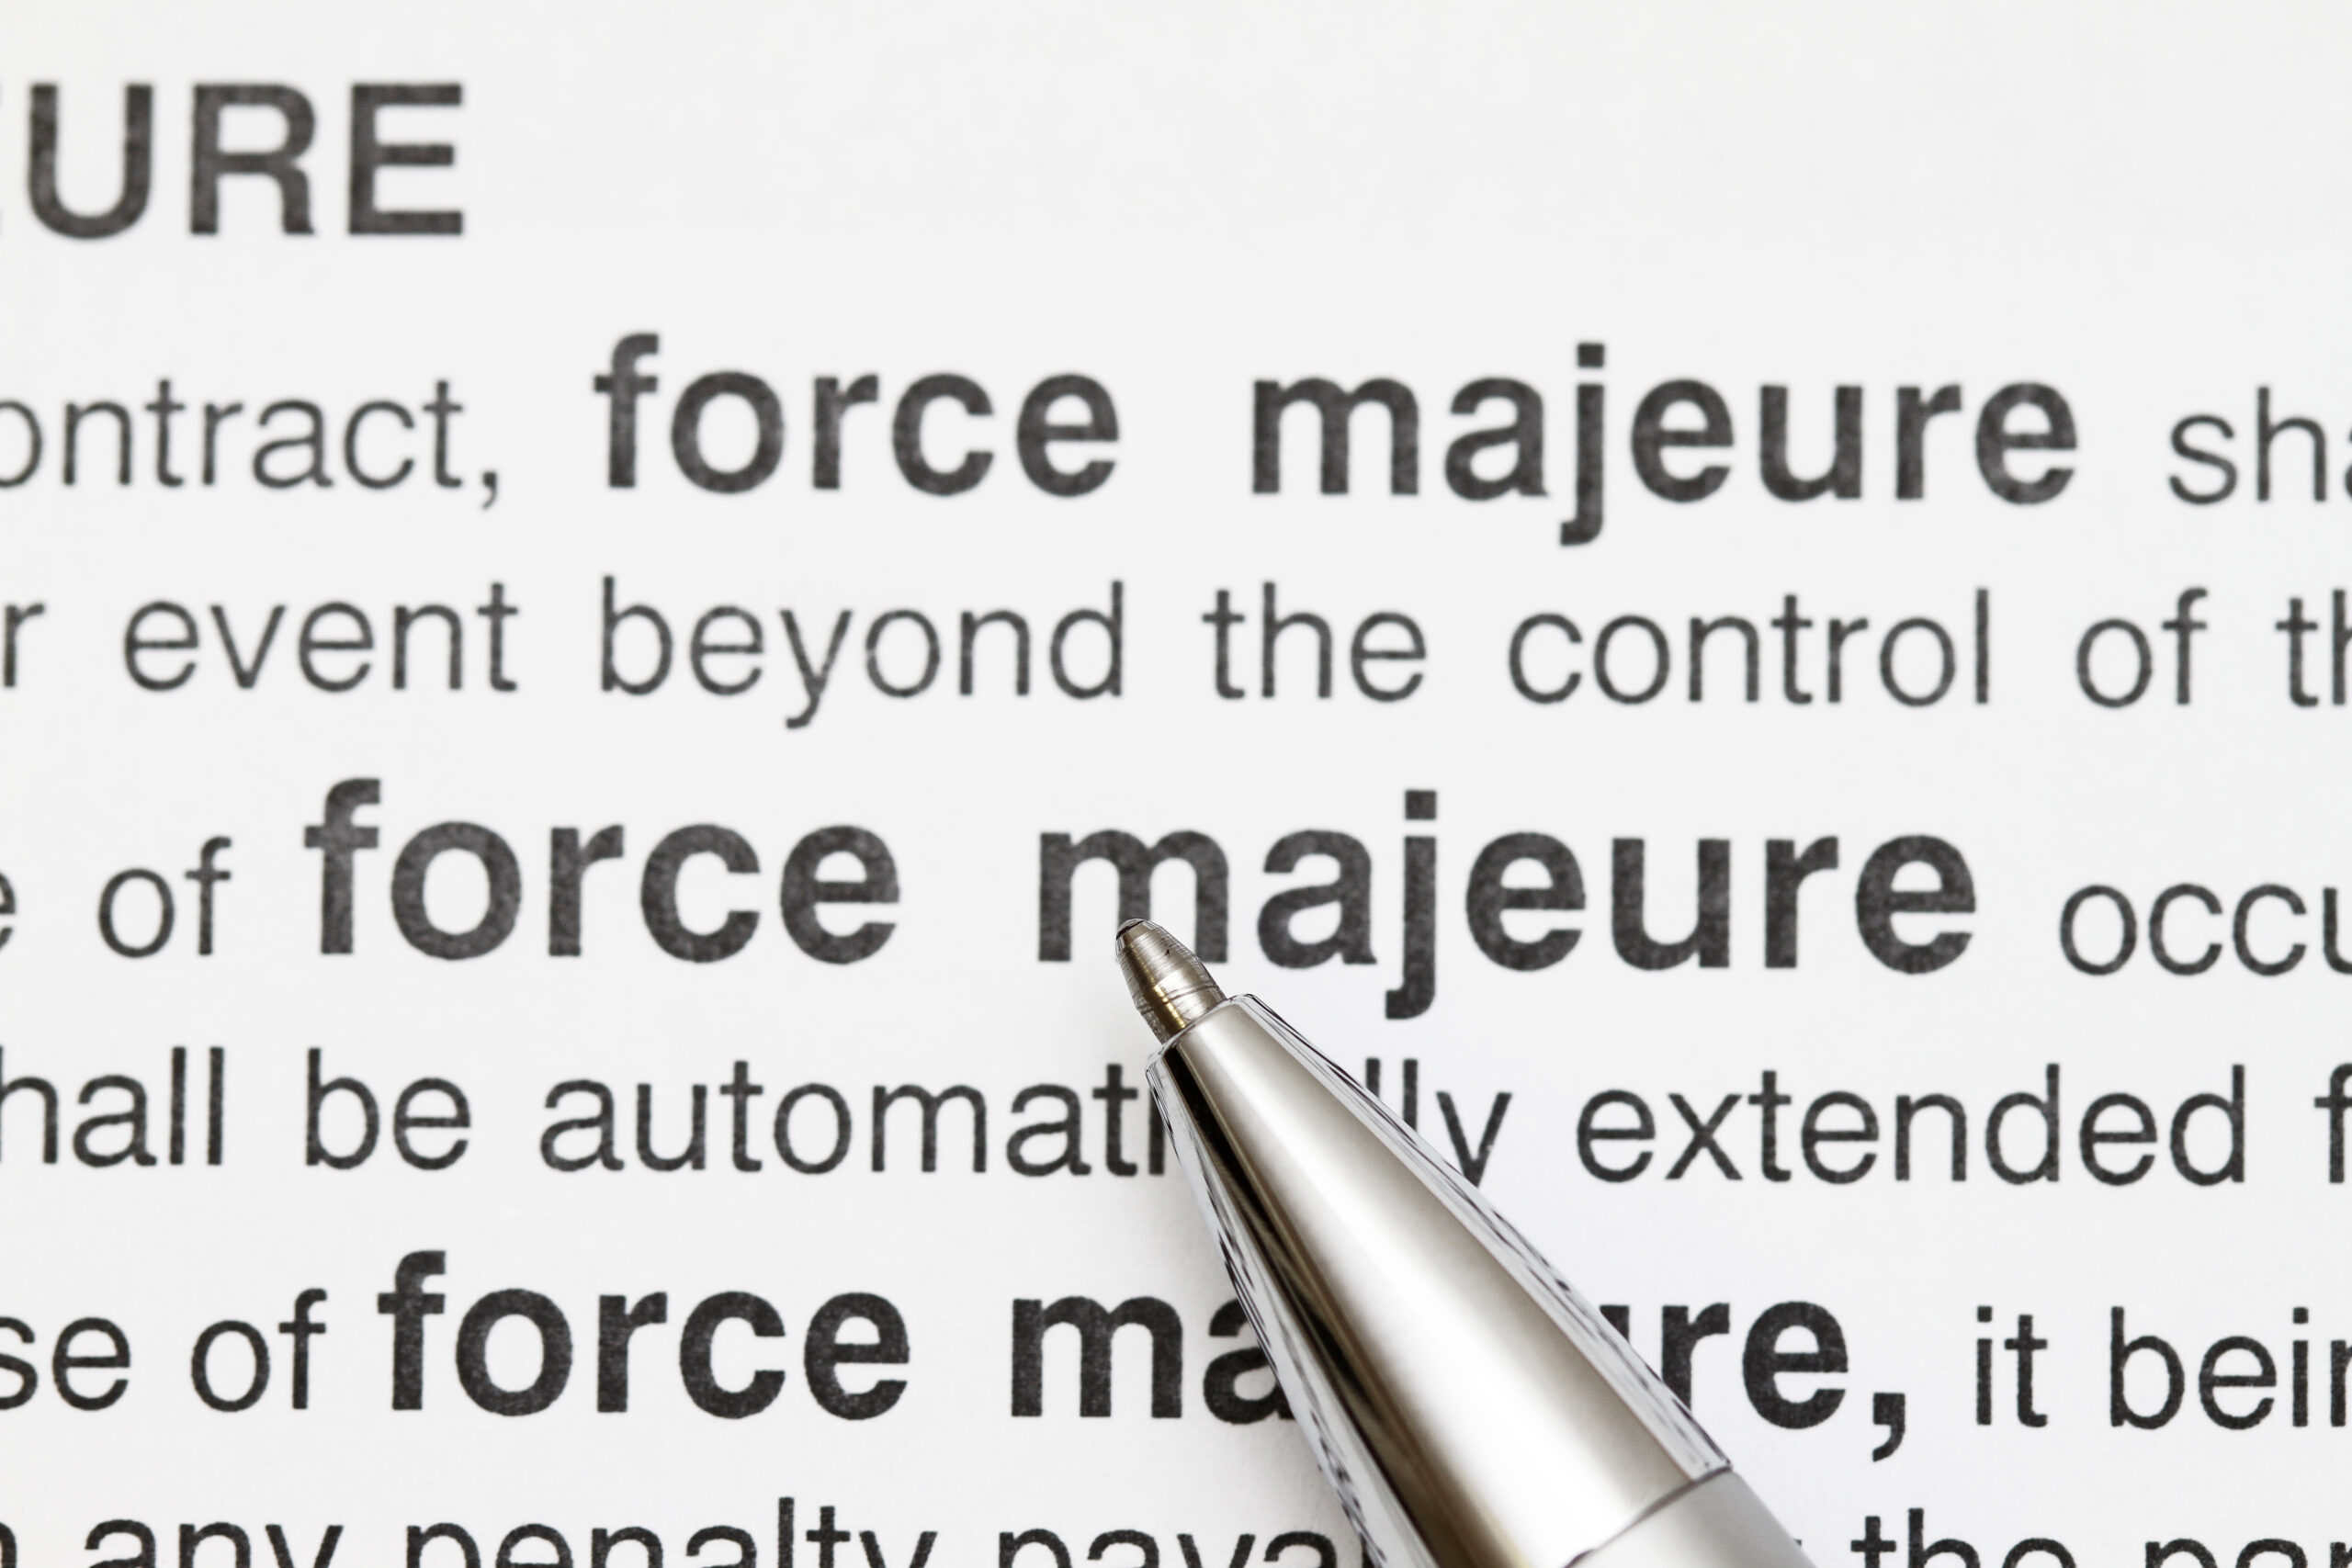 a dictionary style entry describing the legal term force majeure